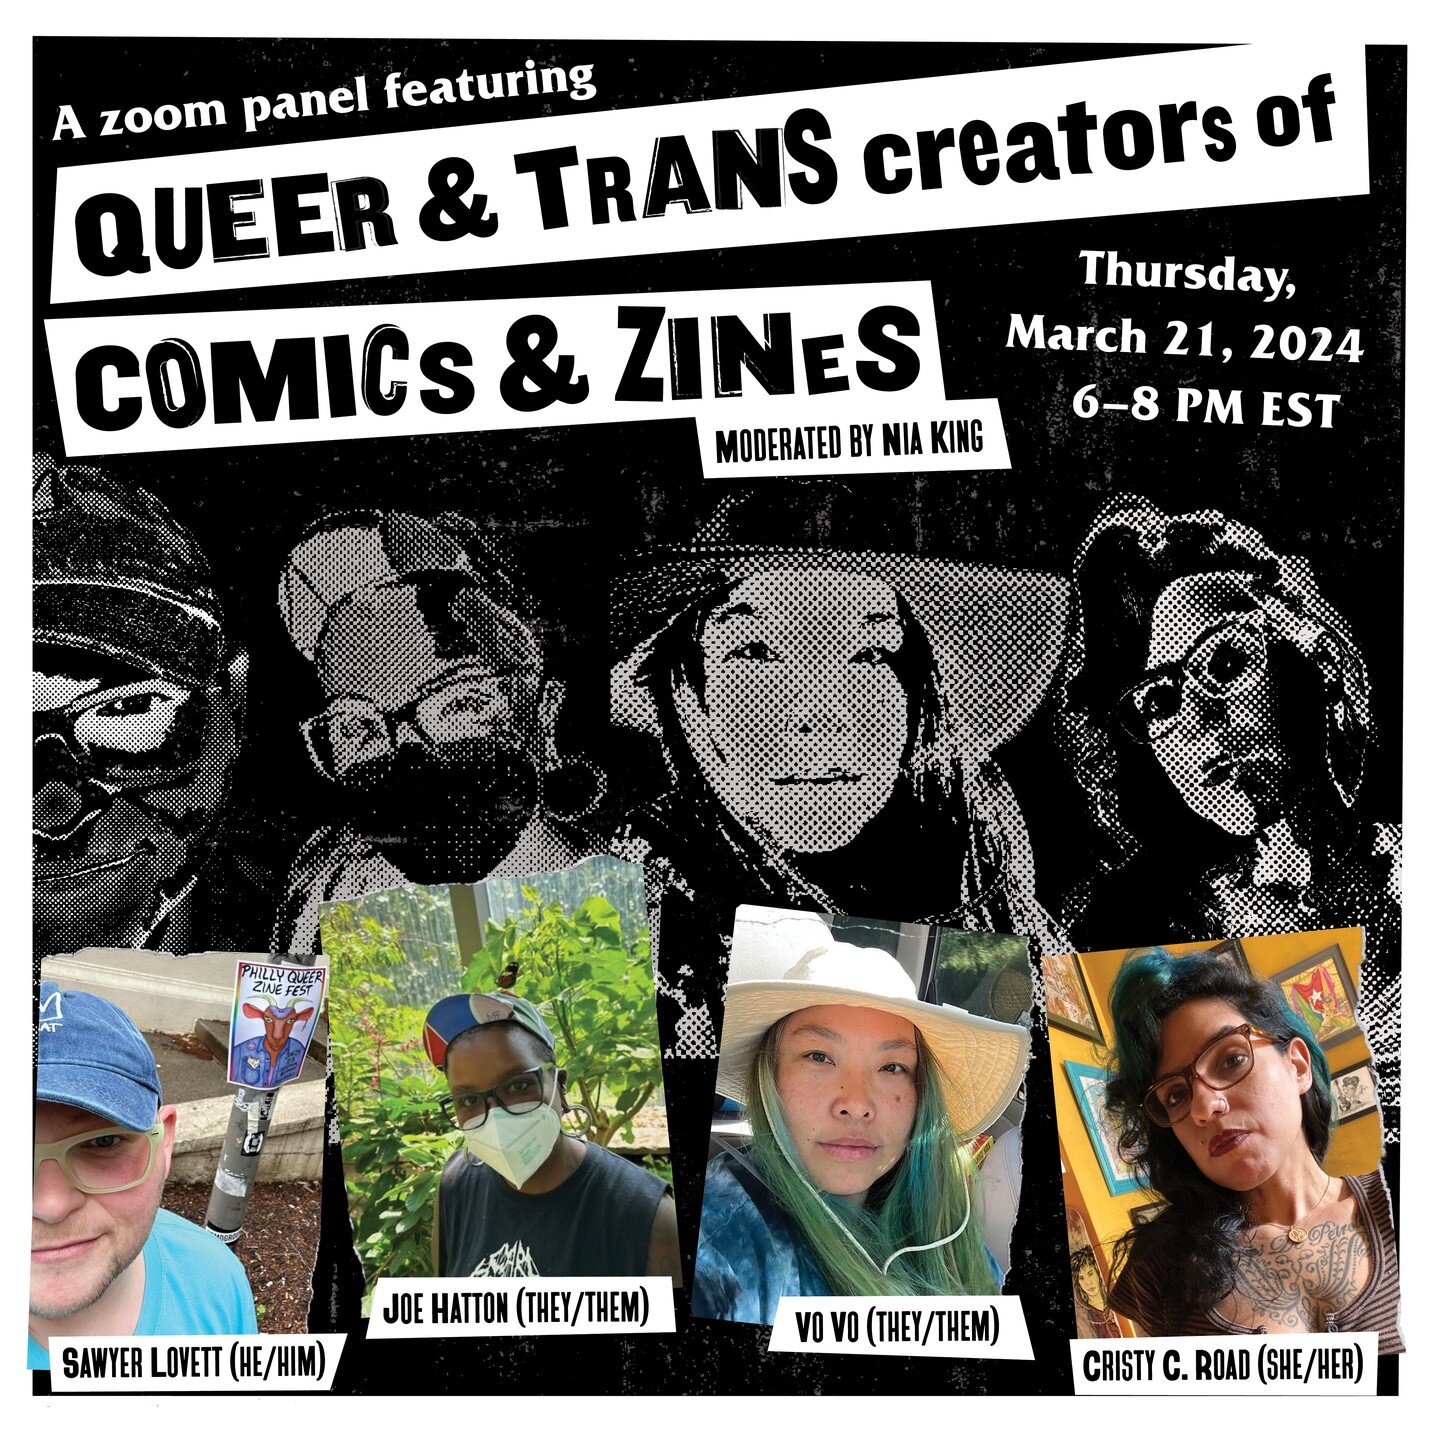 Former tabler and panelist Nia King is moderating a panel of queer &amp; trans creators of comics and zines on Zoom next month! Registration is free, open to the public, and ASL interpretation will be provided. The event will be held Thursday, March 